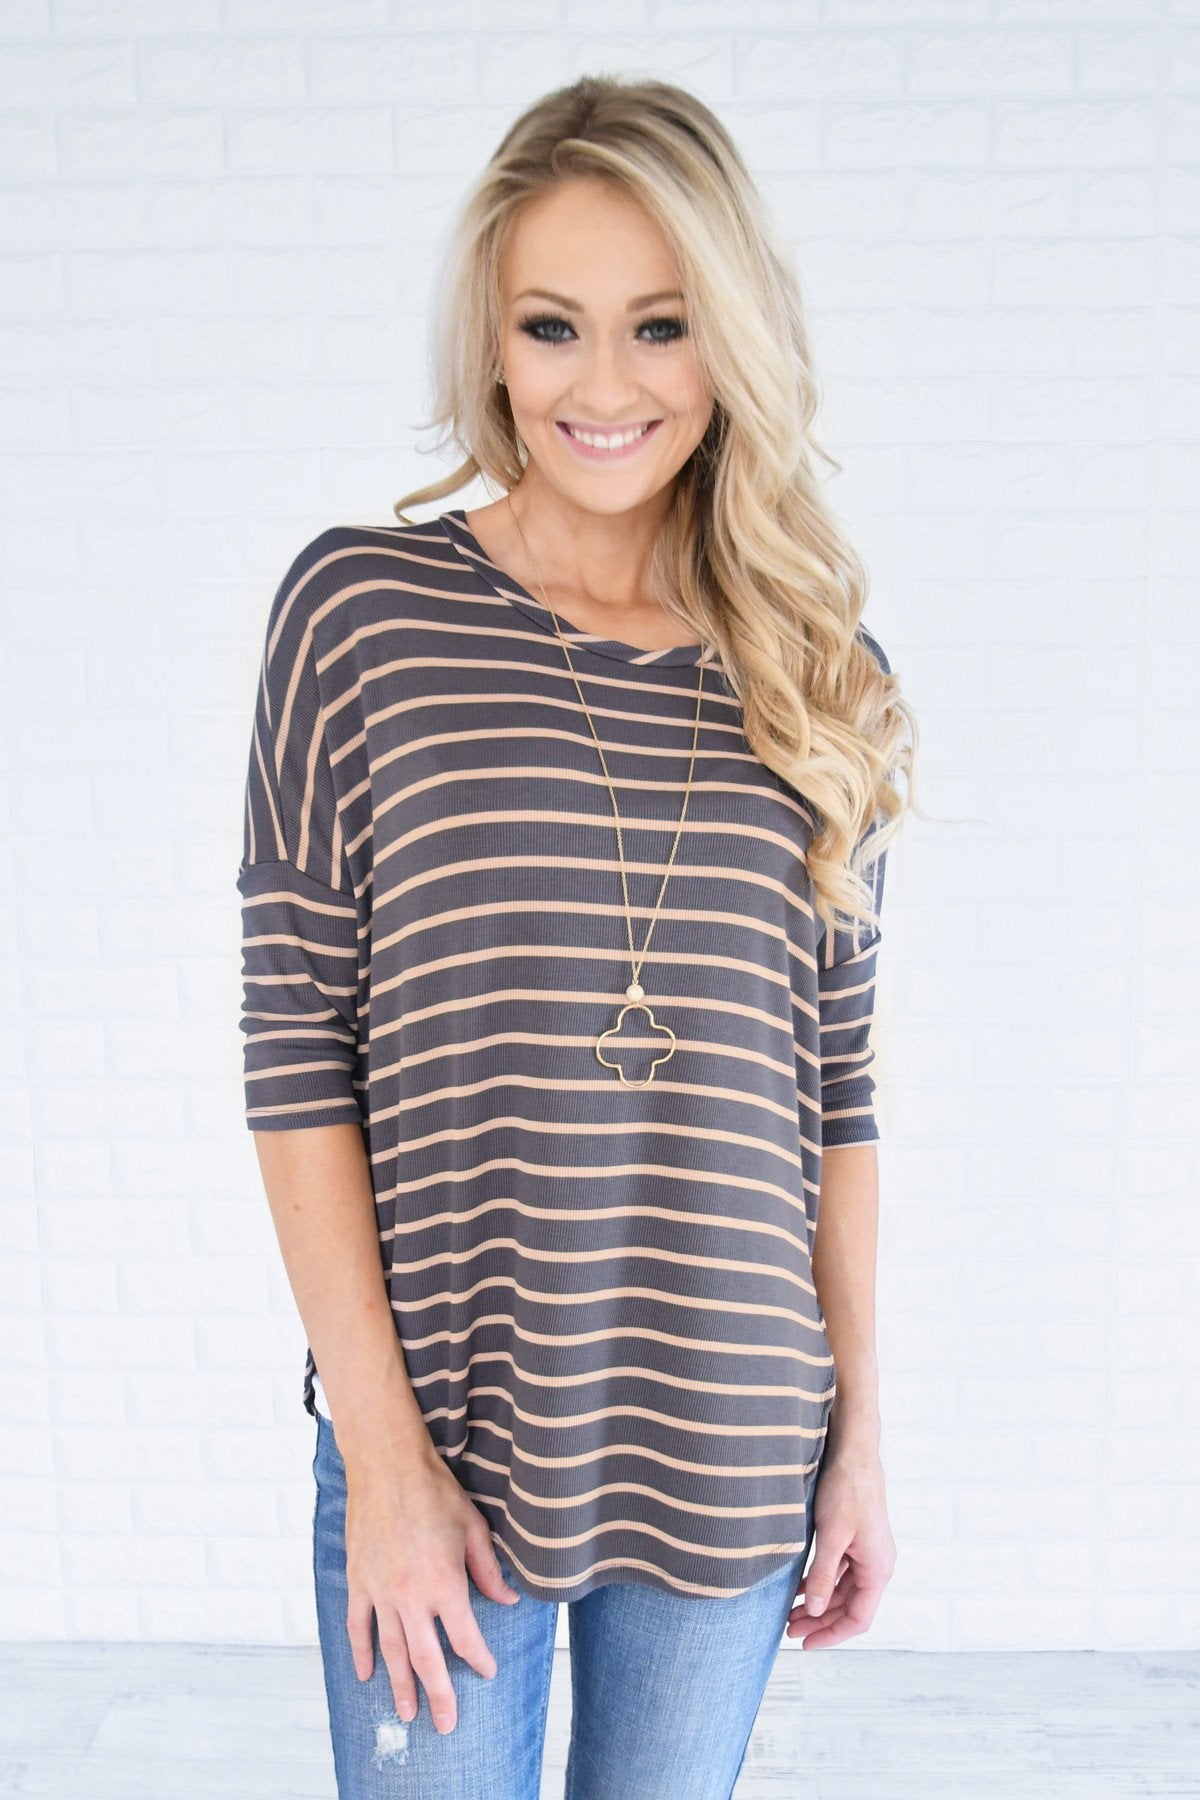 Charcoal & Tan Striped Top – The Pulse Boutique